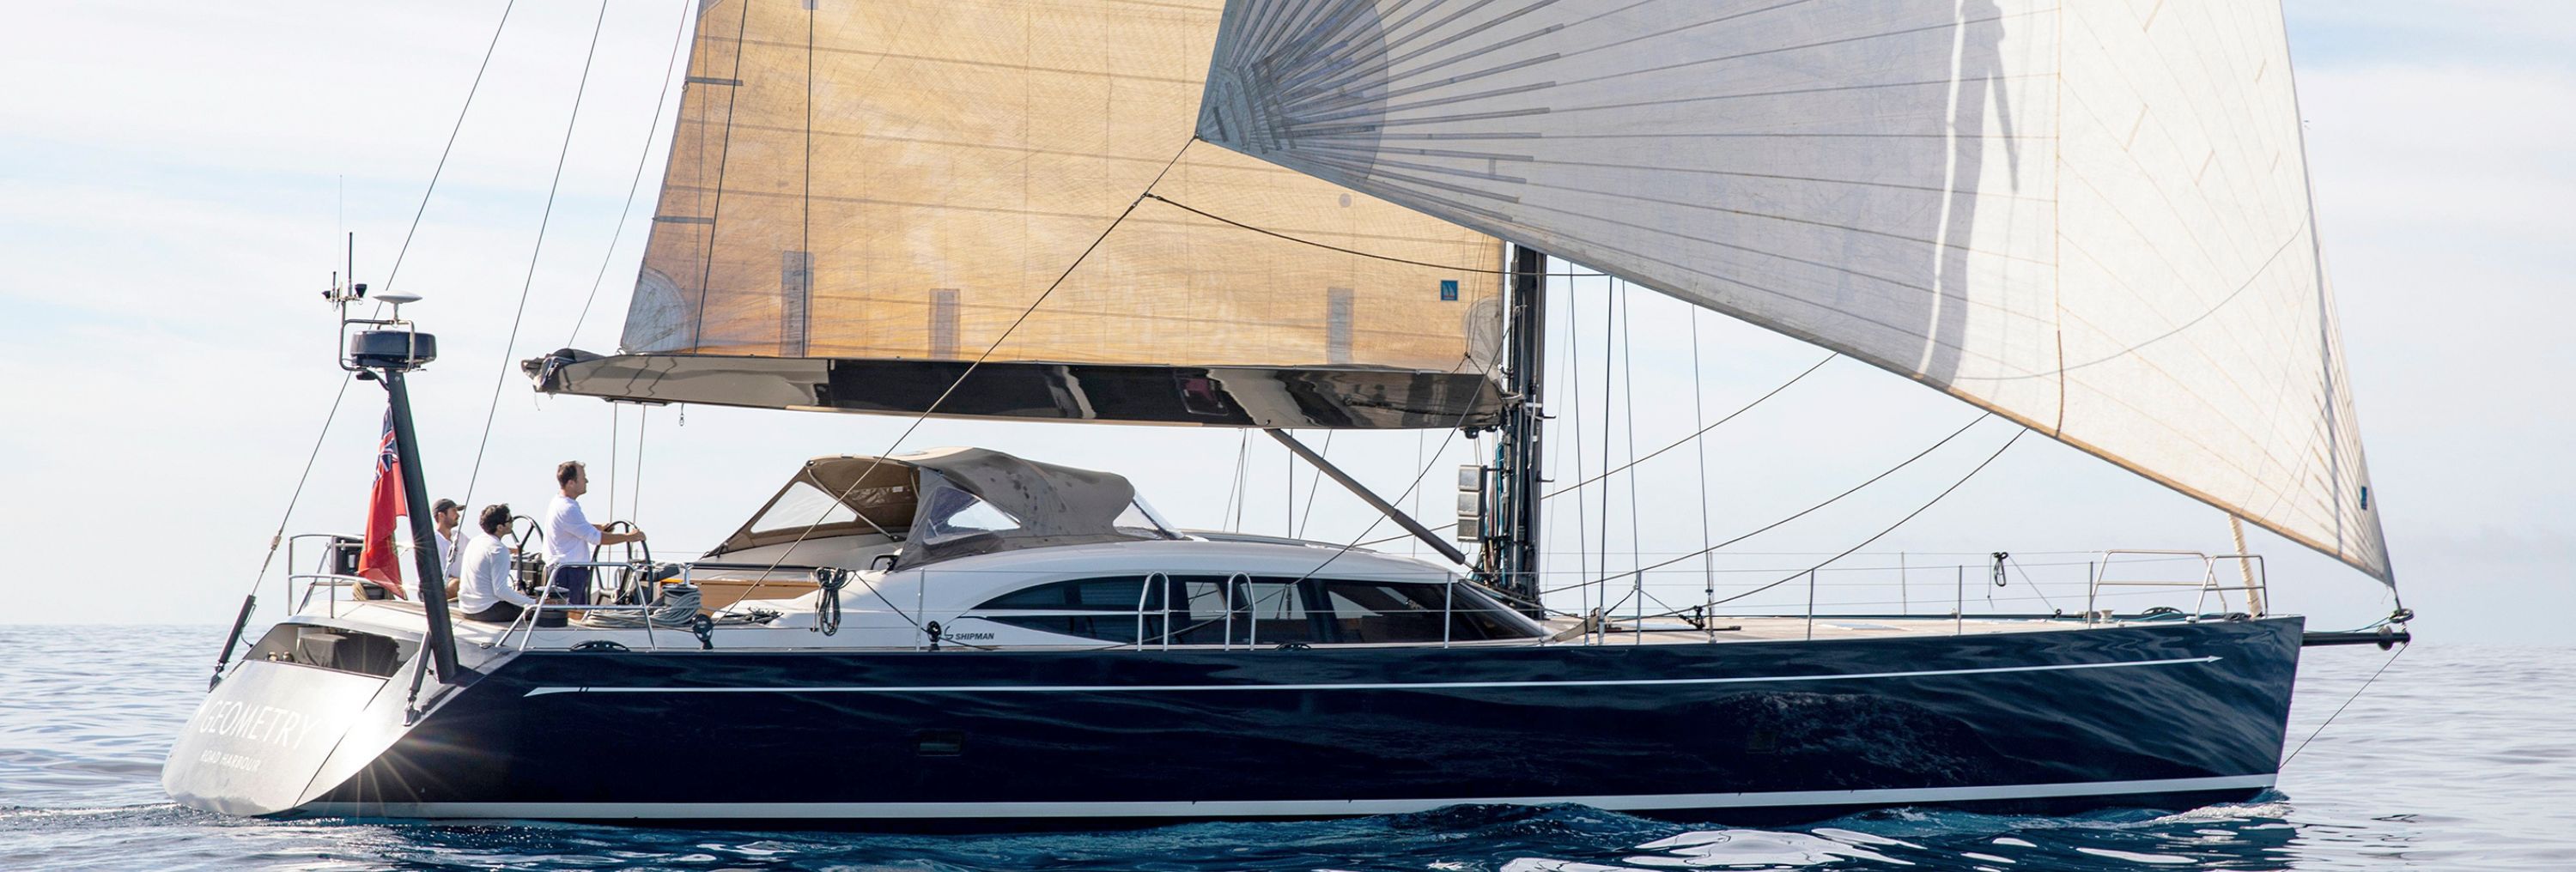 GEOMETRY : New CA Yacht for Sale